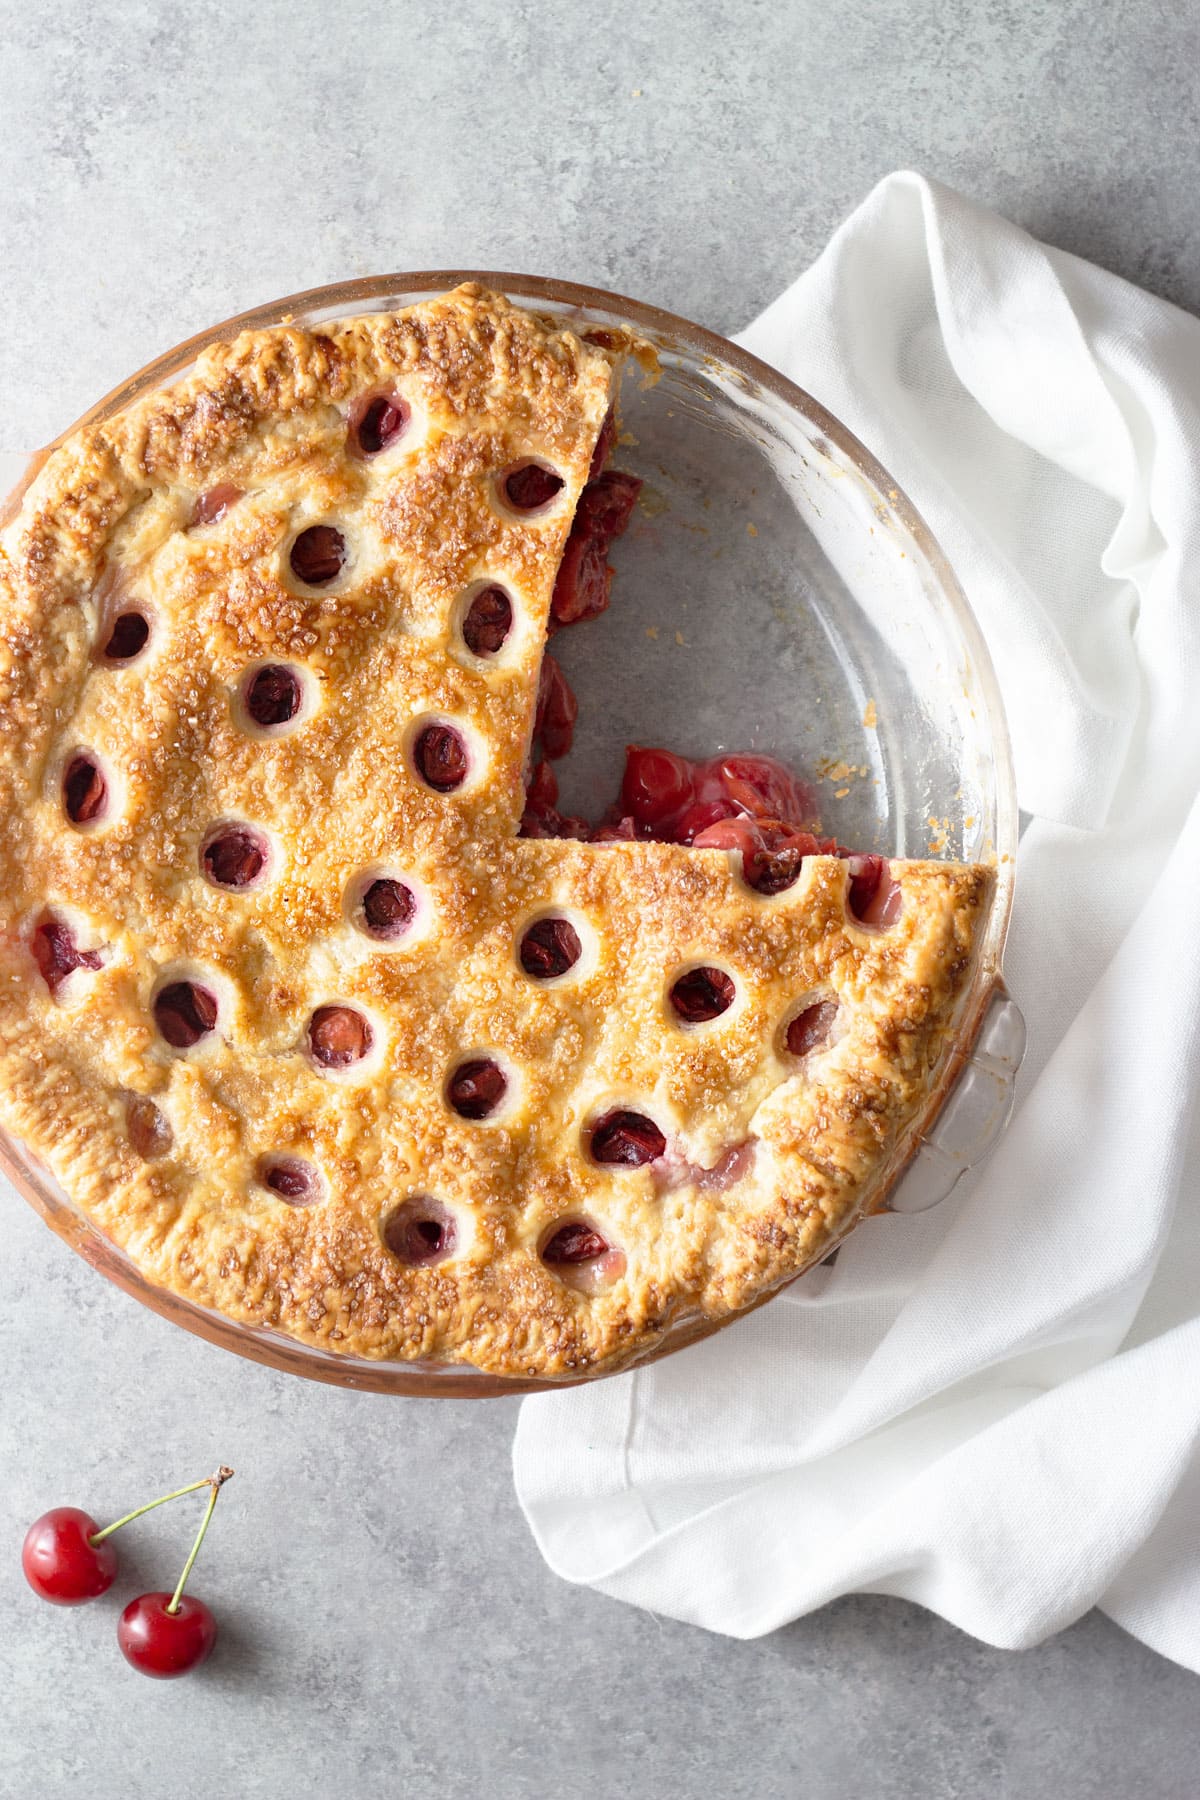 Overhead view of a sour cherry pie with a slice cut out and circles cut out of the top crust.